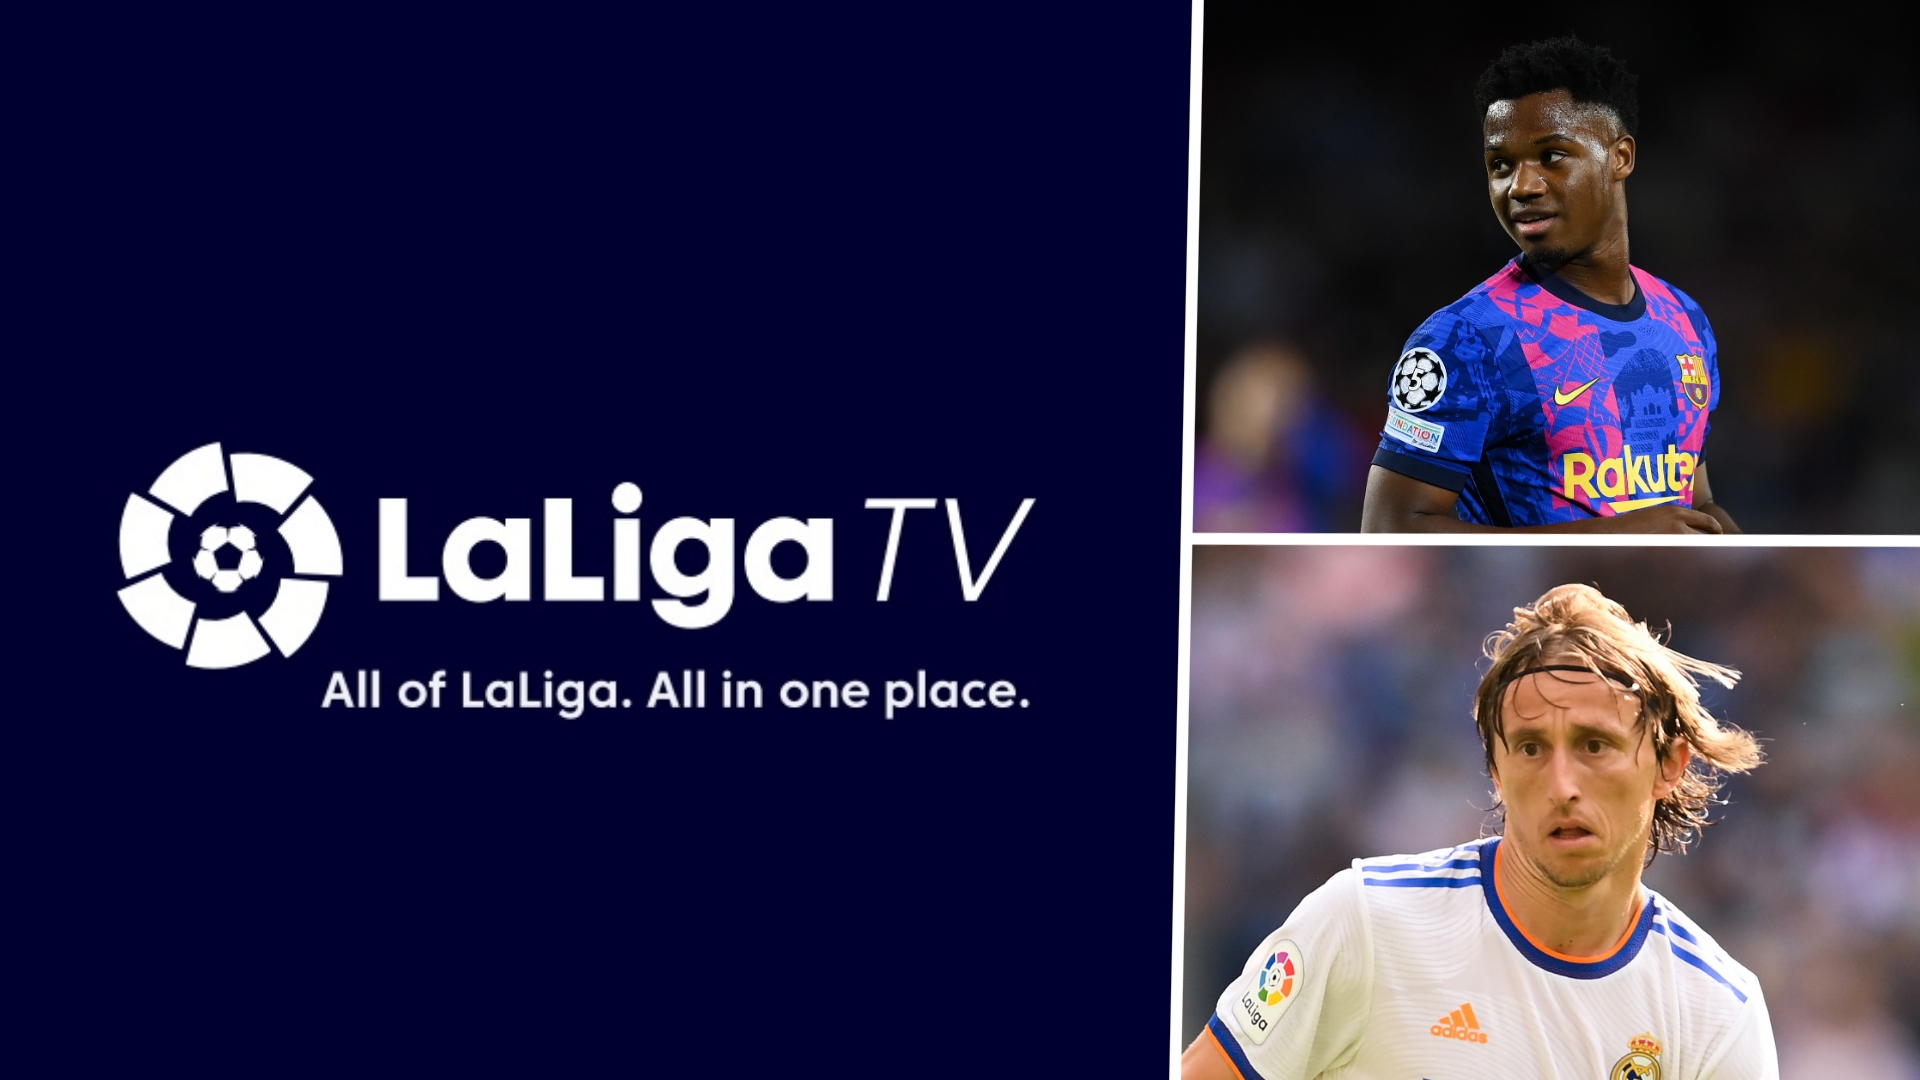 What is LaLiga TV and how can I watch?